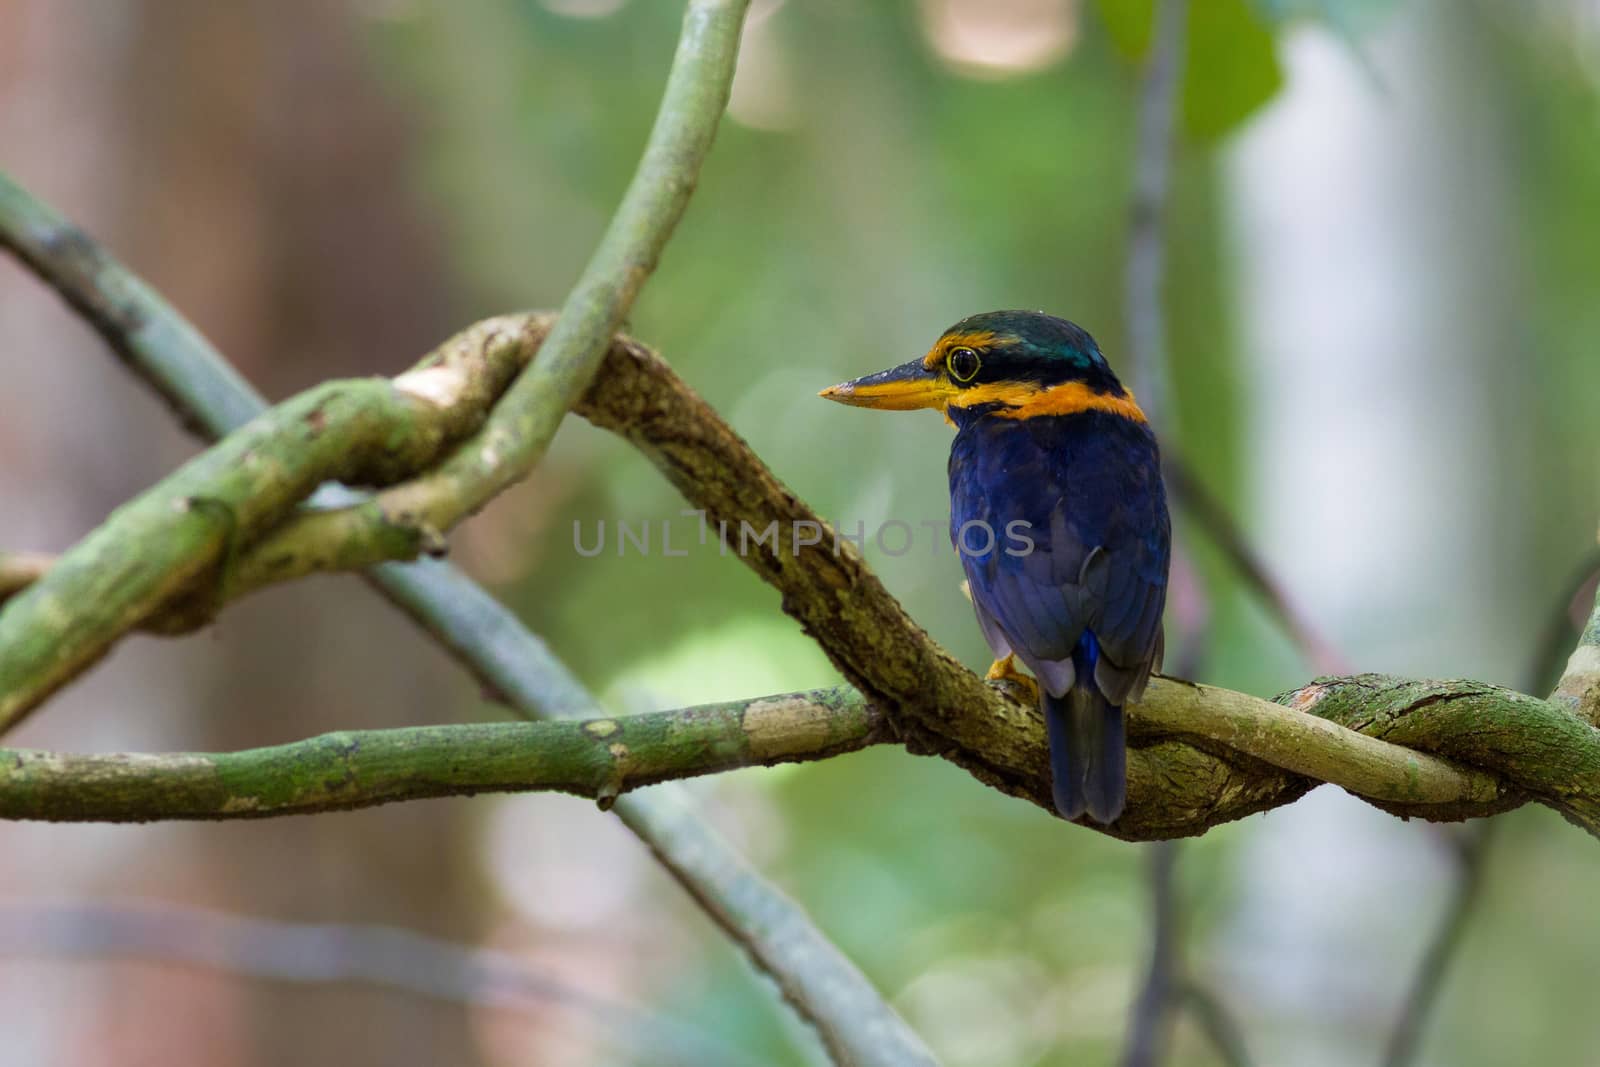 Rufous-collared Kingfisher, standing on a branch, taken in Thailand